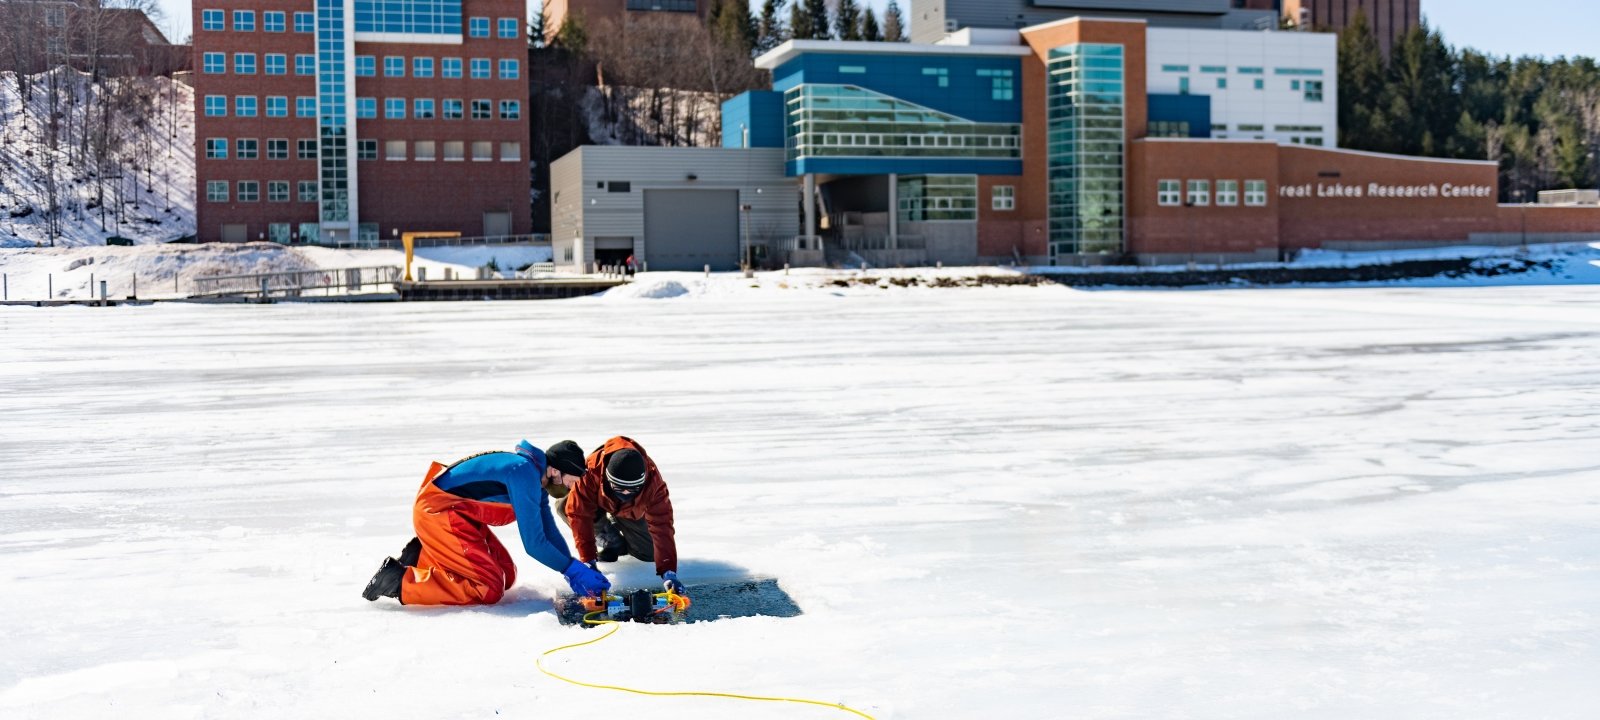 Researchers on the frozen canal across from campus dropping research equipment in the water.